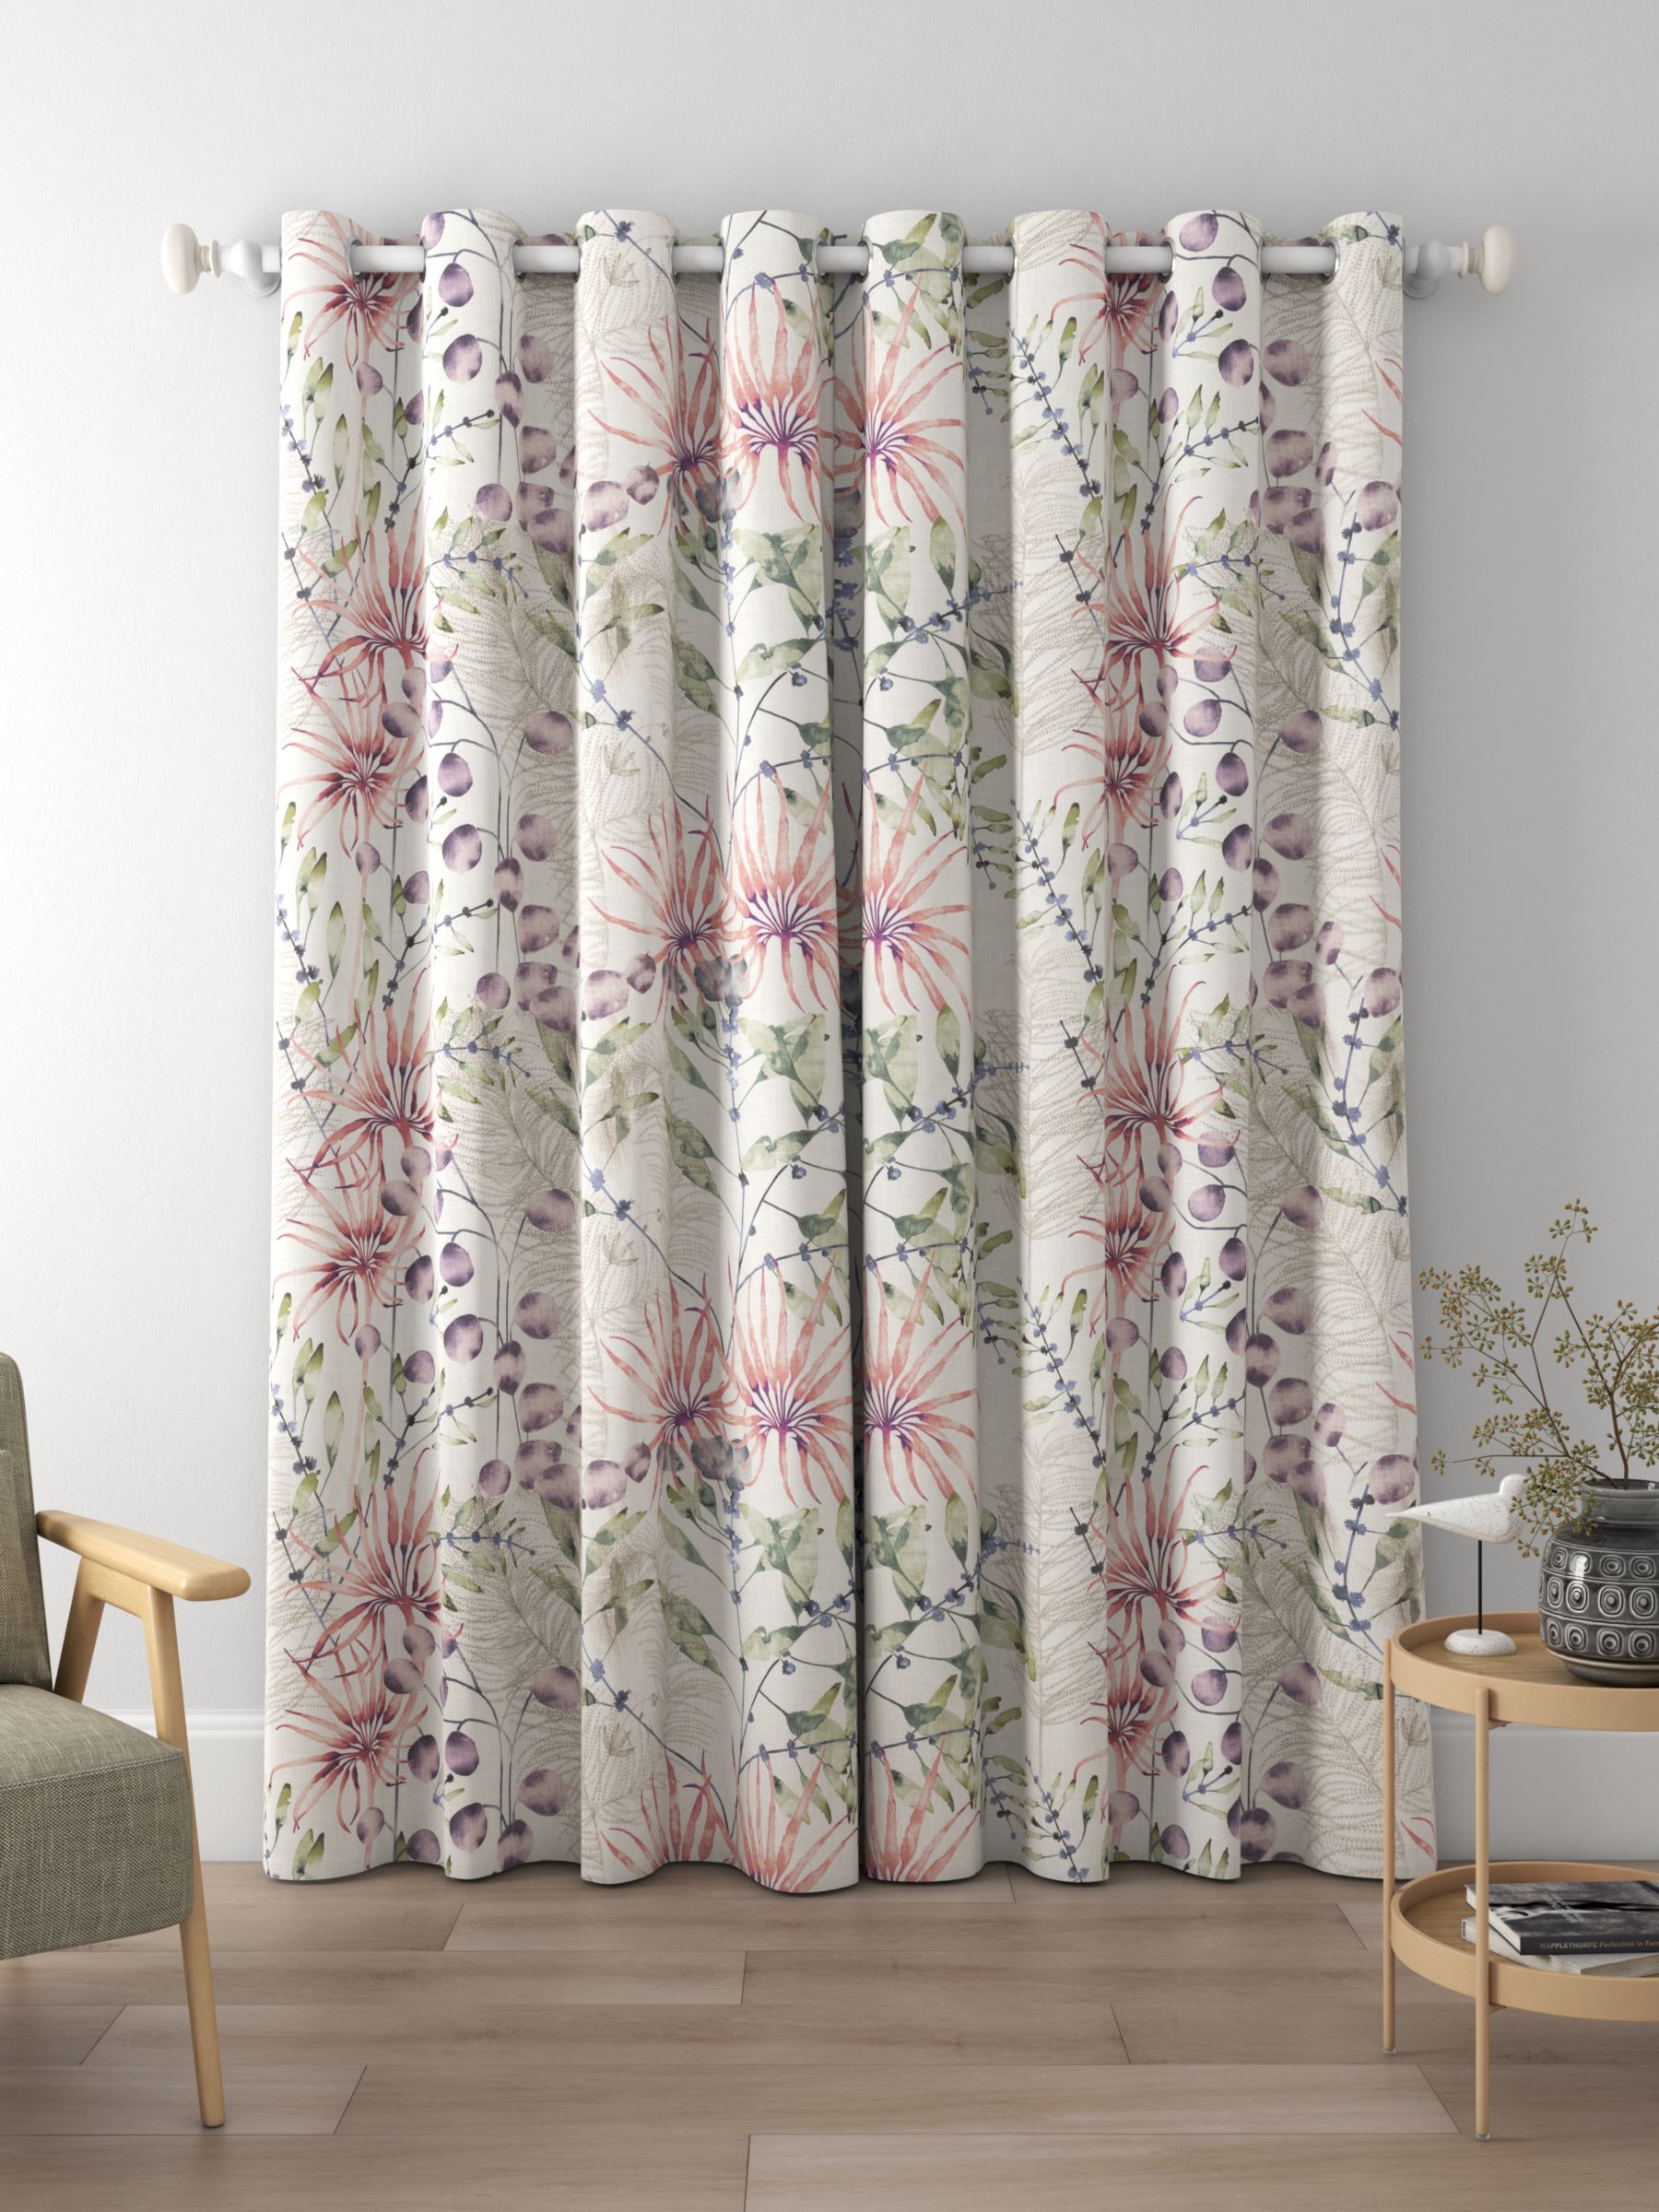 Harlequin Postelia Made to Measure Curtains or Roman Blind, Berry/Heather